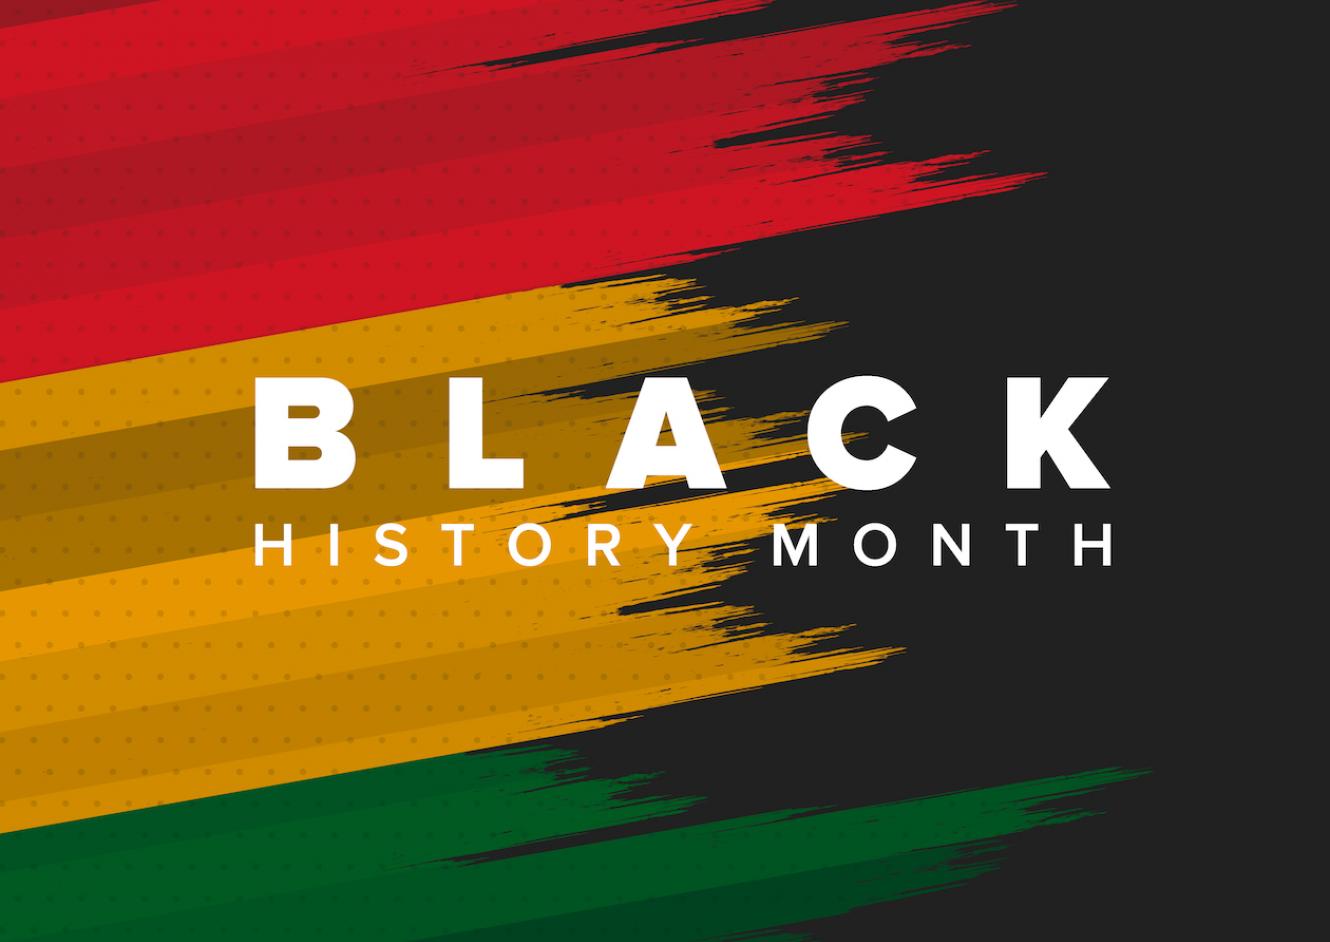 celebrate-black-history-month-with-these-engagement-and-learning-opportunities-uw-combined